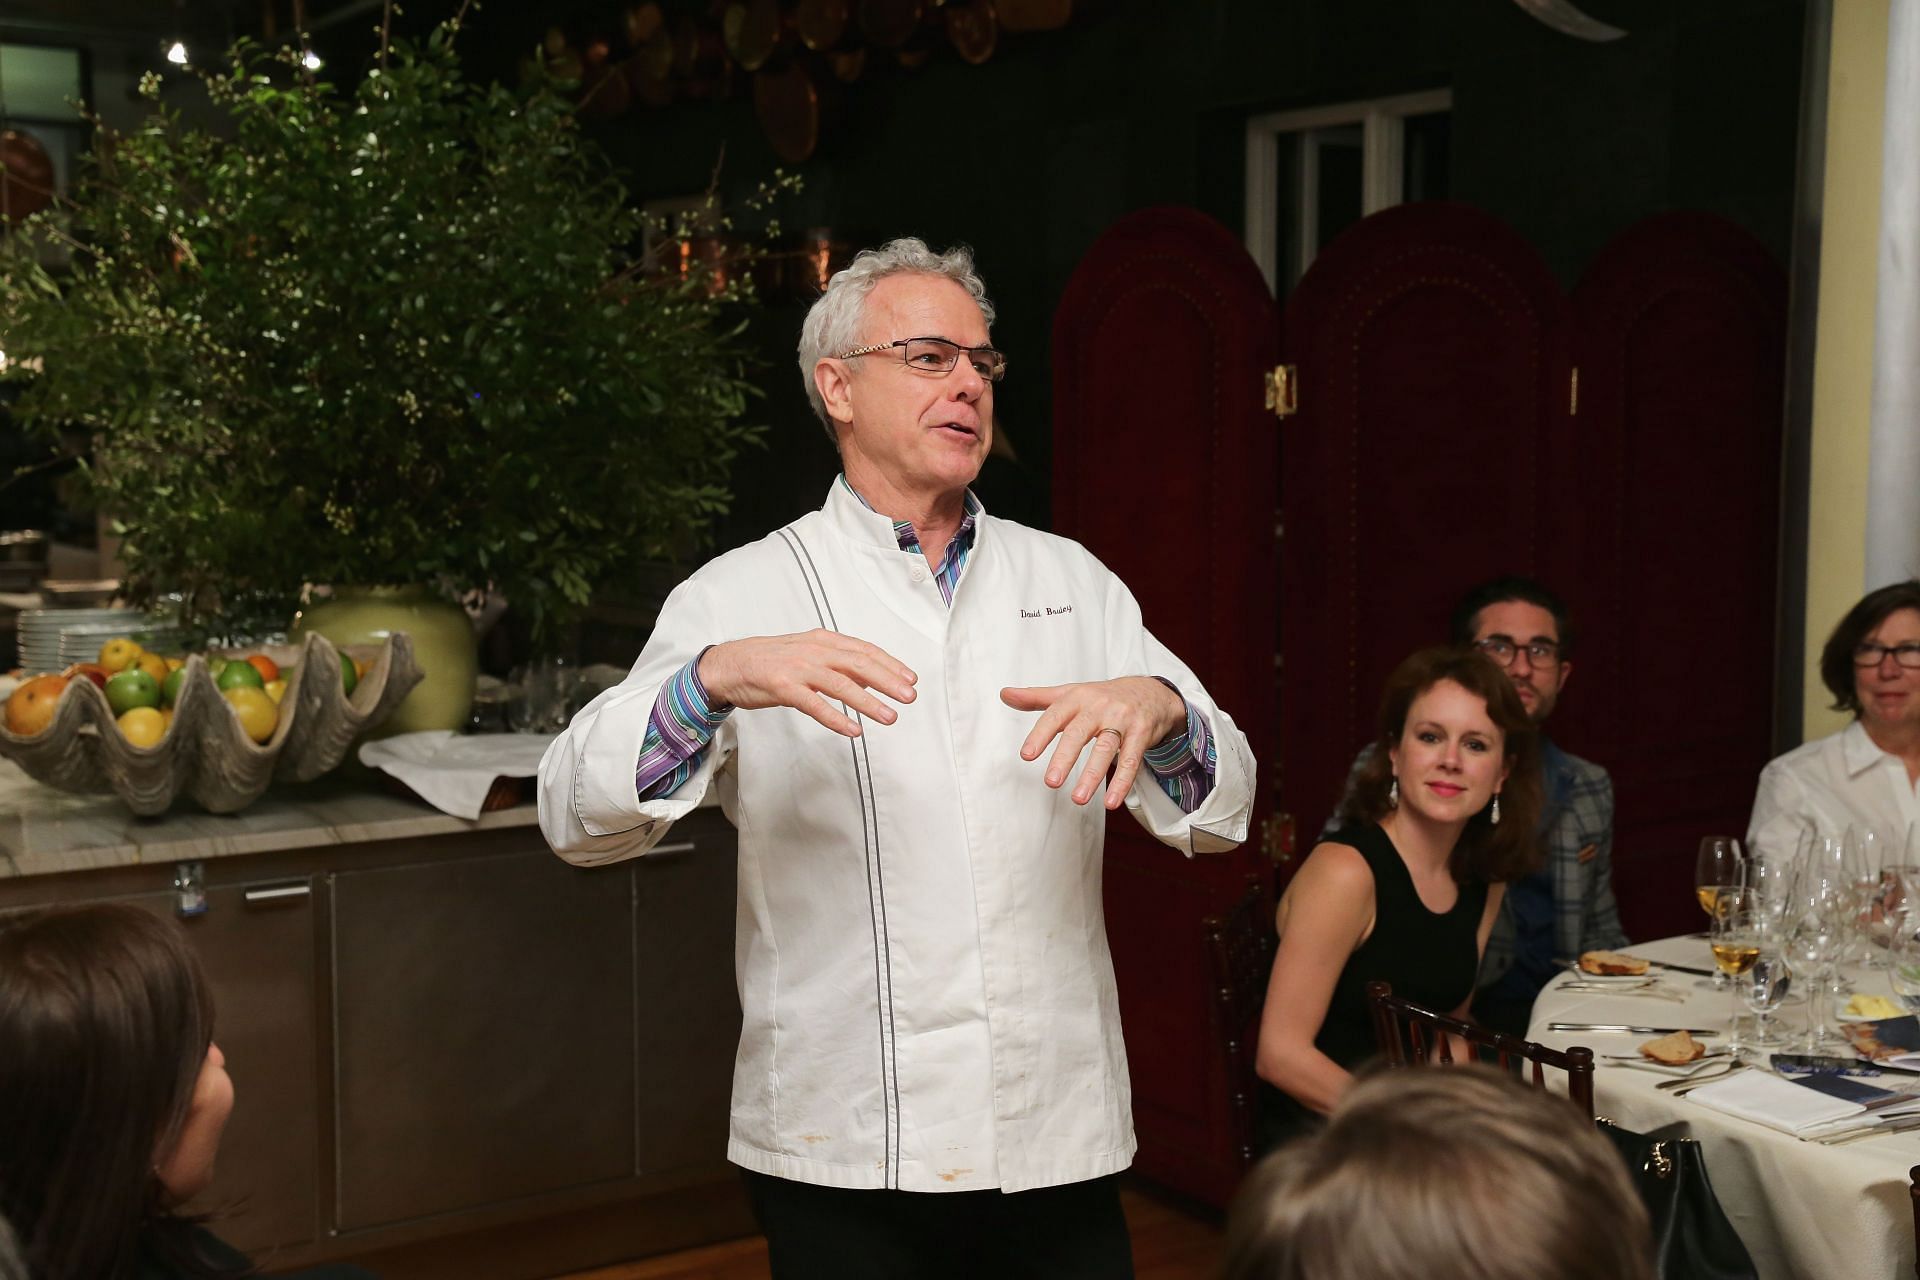 New York Culinary Experience Private Dinner Featuring Chefs David Bouley, Daniel Rose, And David Waltuck Hosted By New York Magazine Culinary Editor Gillian Duffy